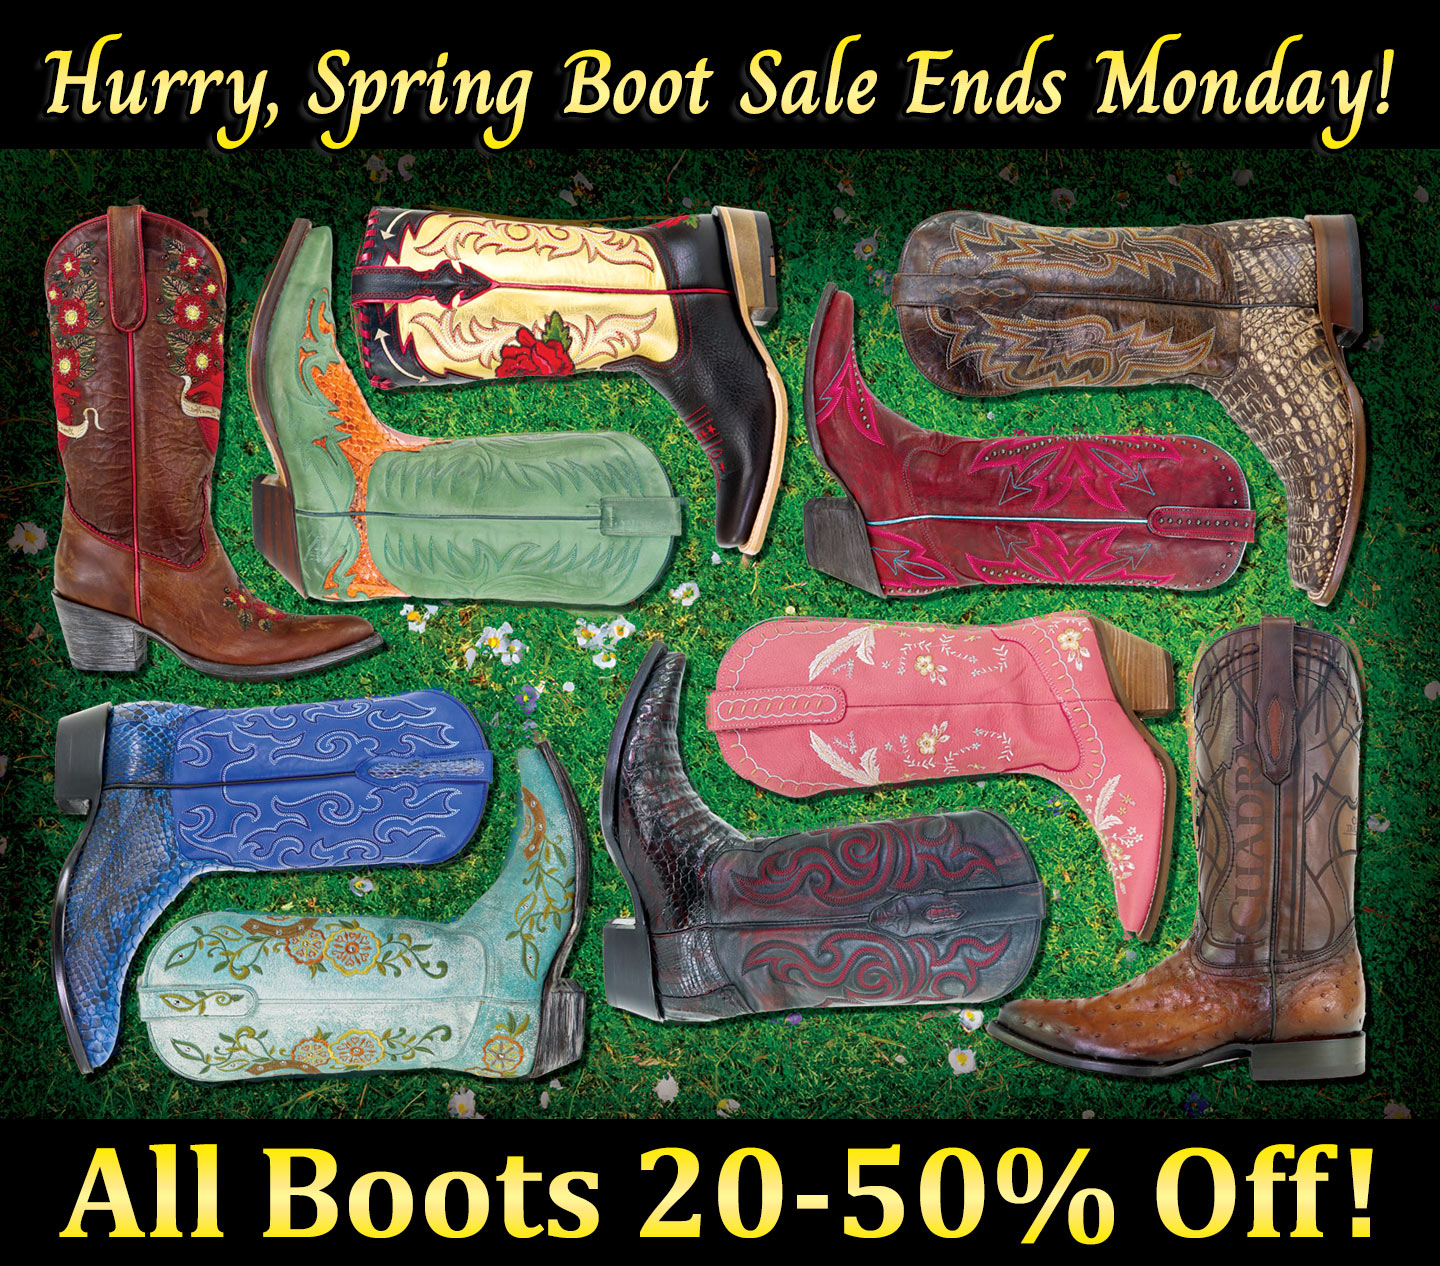 Spring Boot Sale ends Monday 20-50% Off All Boots